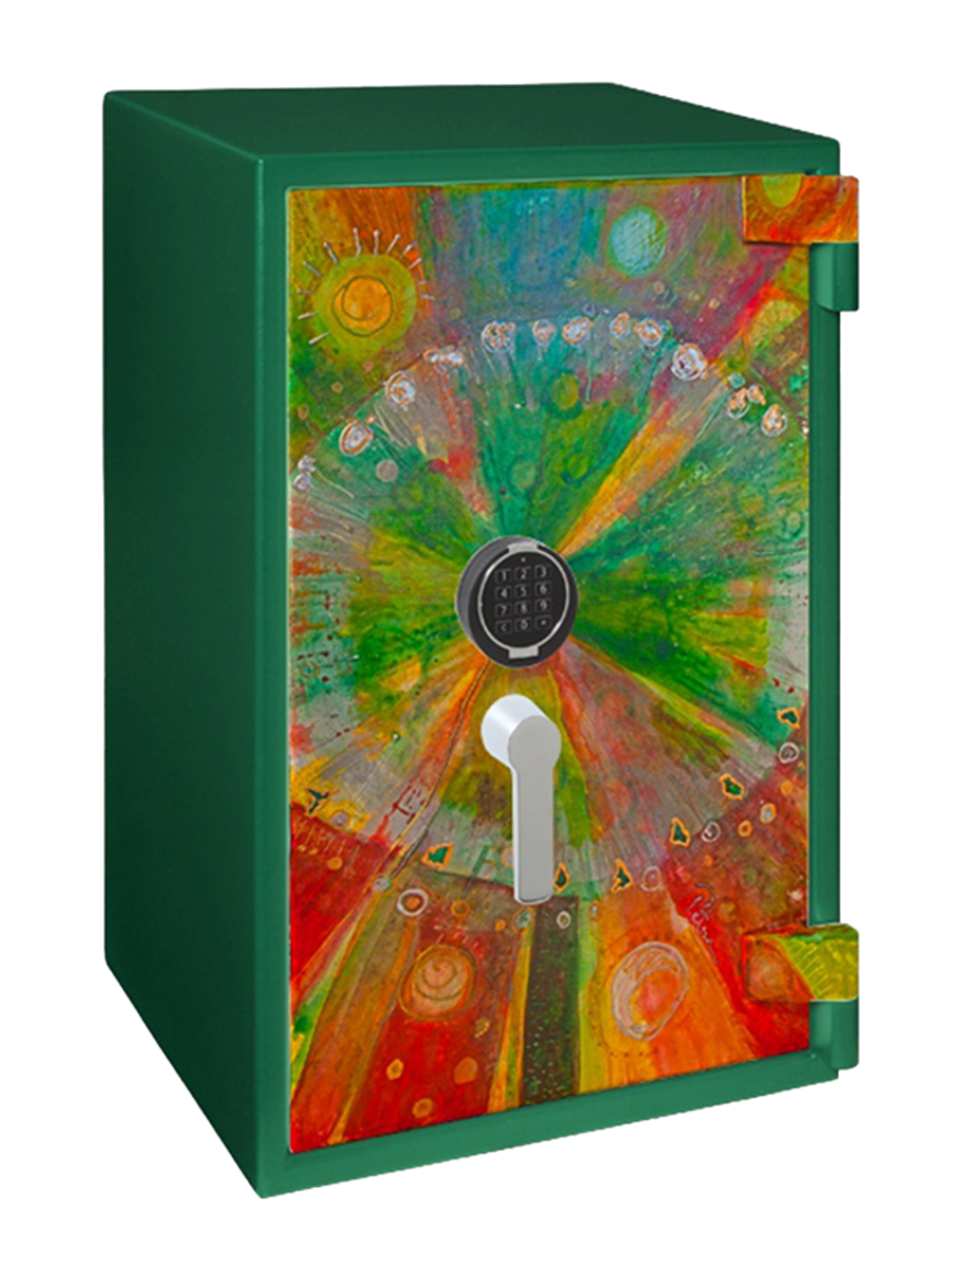 Unique paintings of safes: Colourful summer flowers